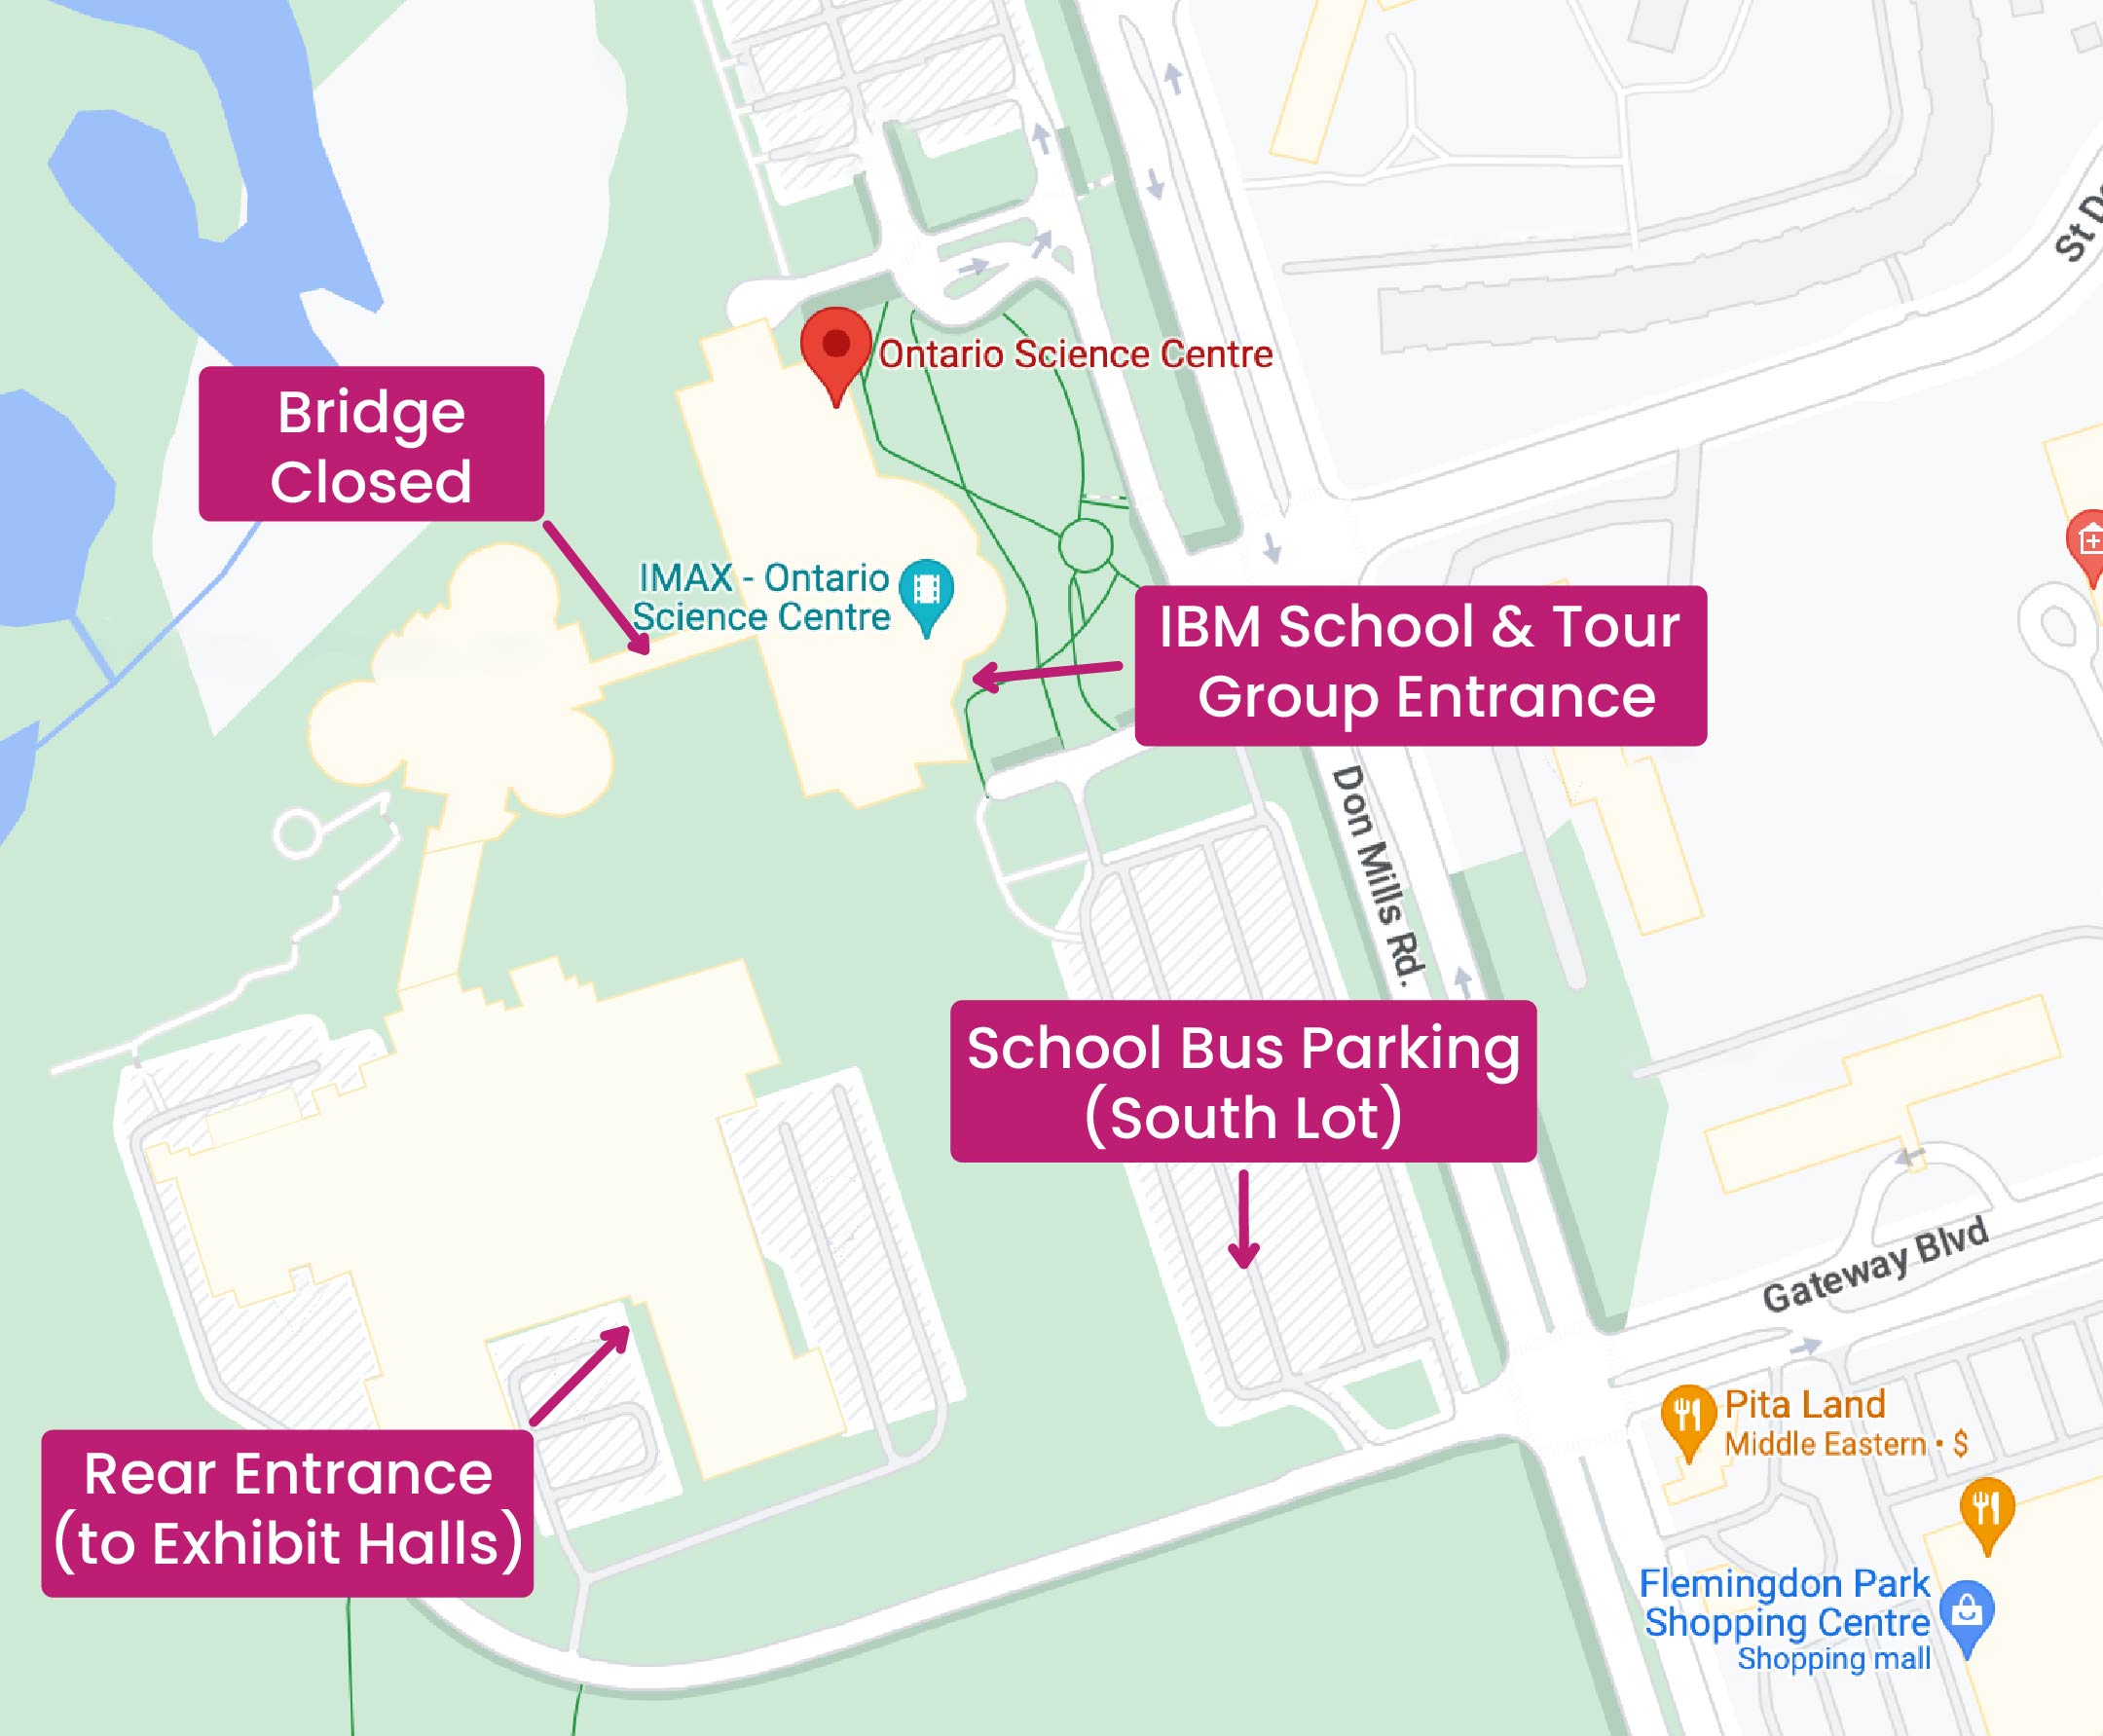 Map showing the School Bus Parking Lot, IBM School Group Entrance and the Rear Entrance to the Science Centre.